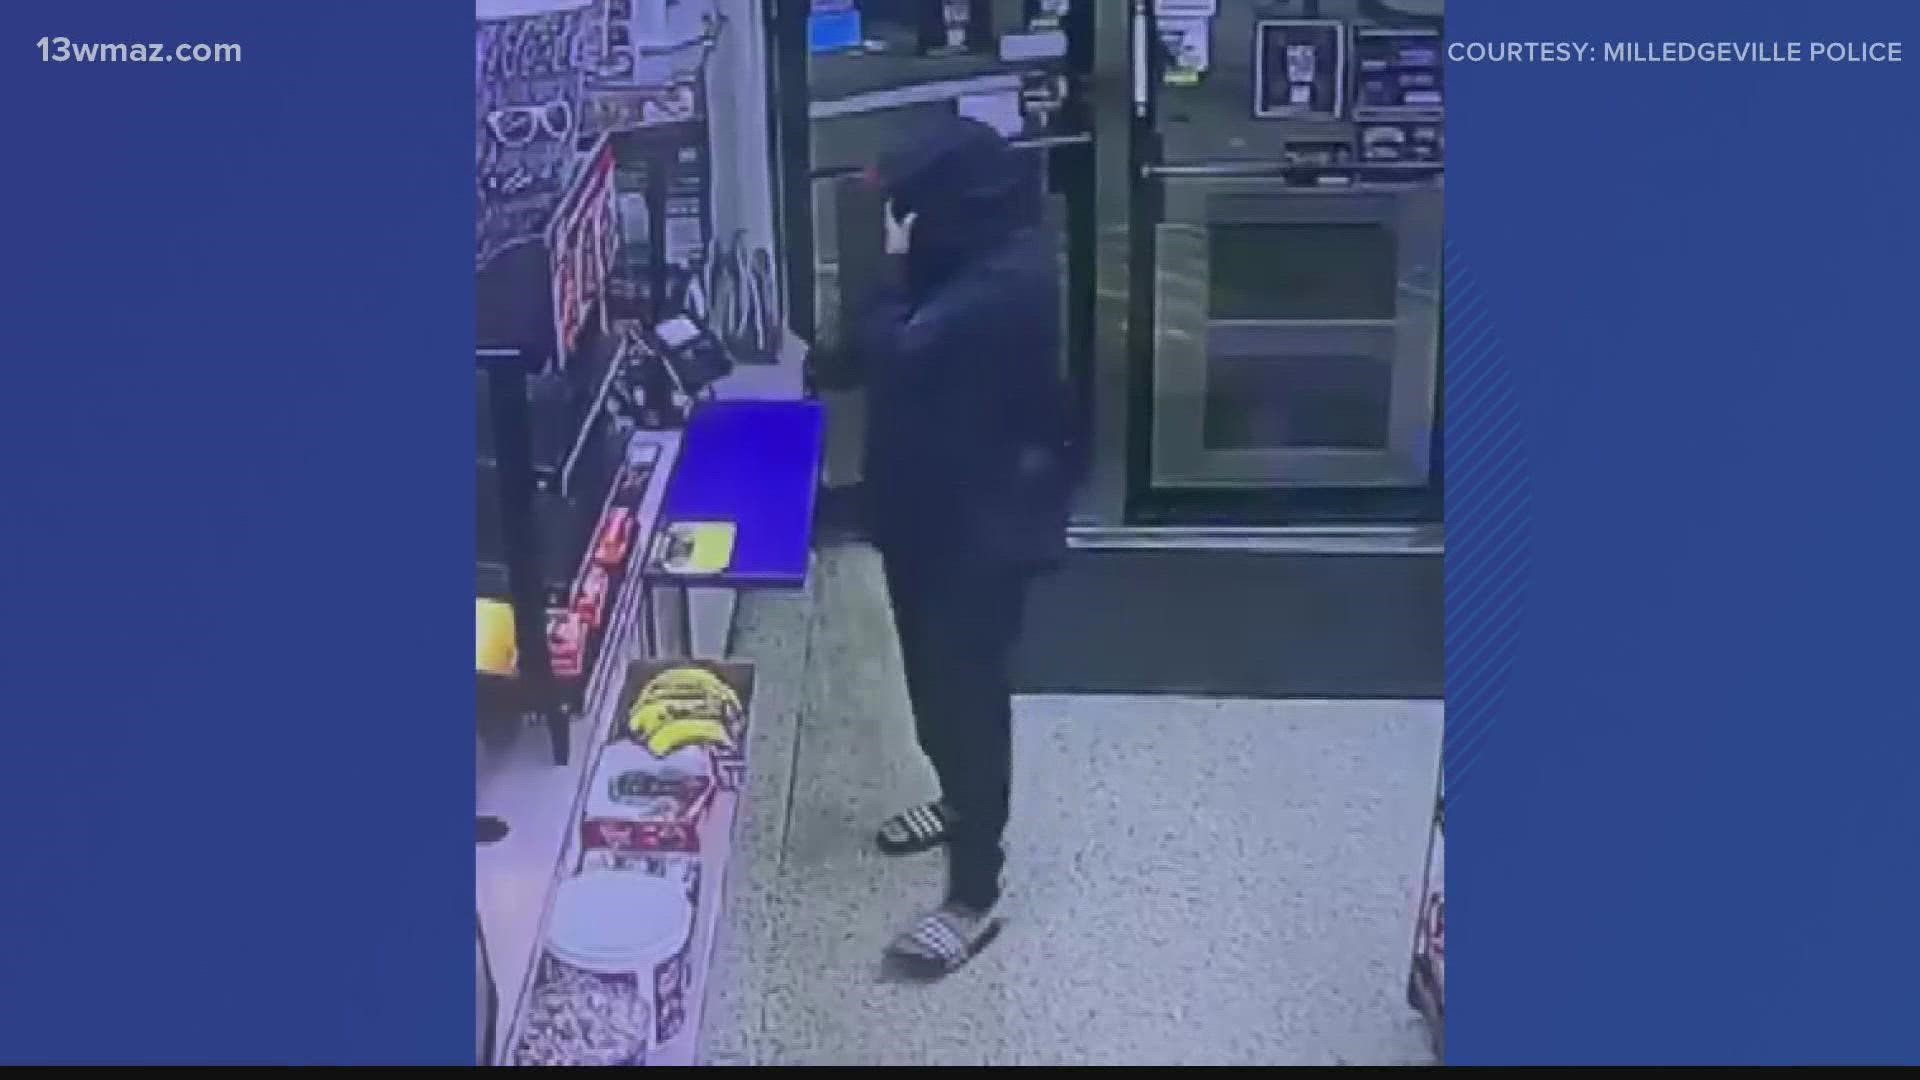 Milledgeville police are investigating an armed robbery that happened at the Amoco Stop N Shop store located at 1200 Vinson Highway Wednesday night.